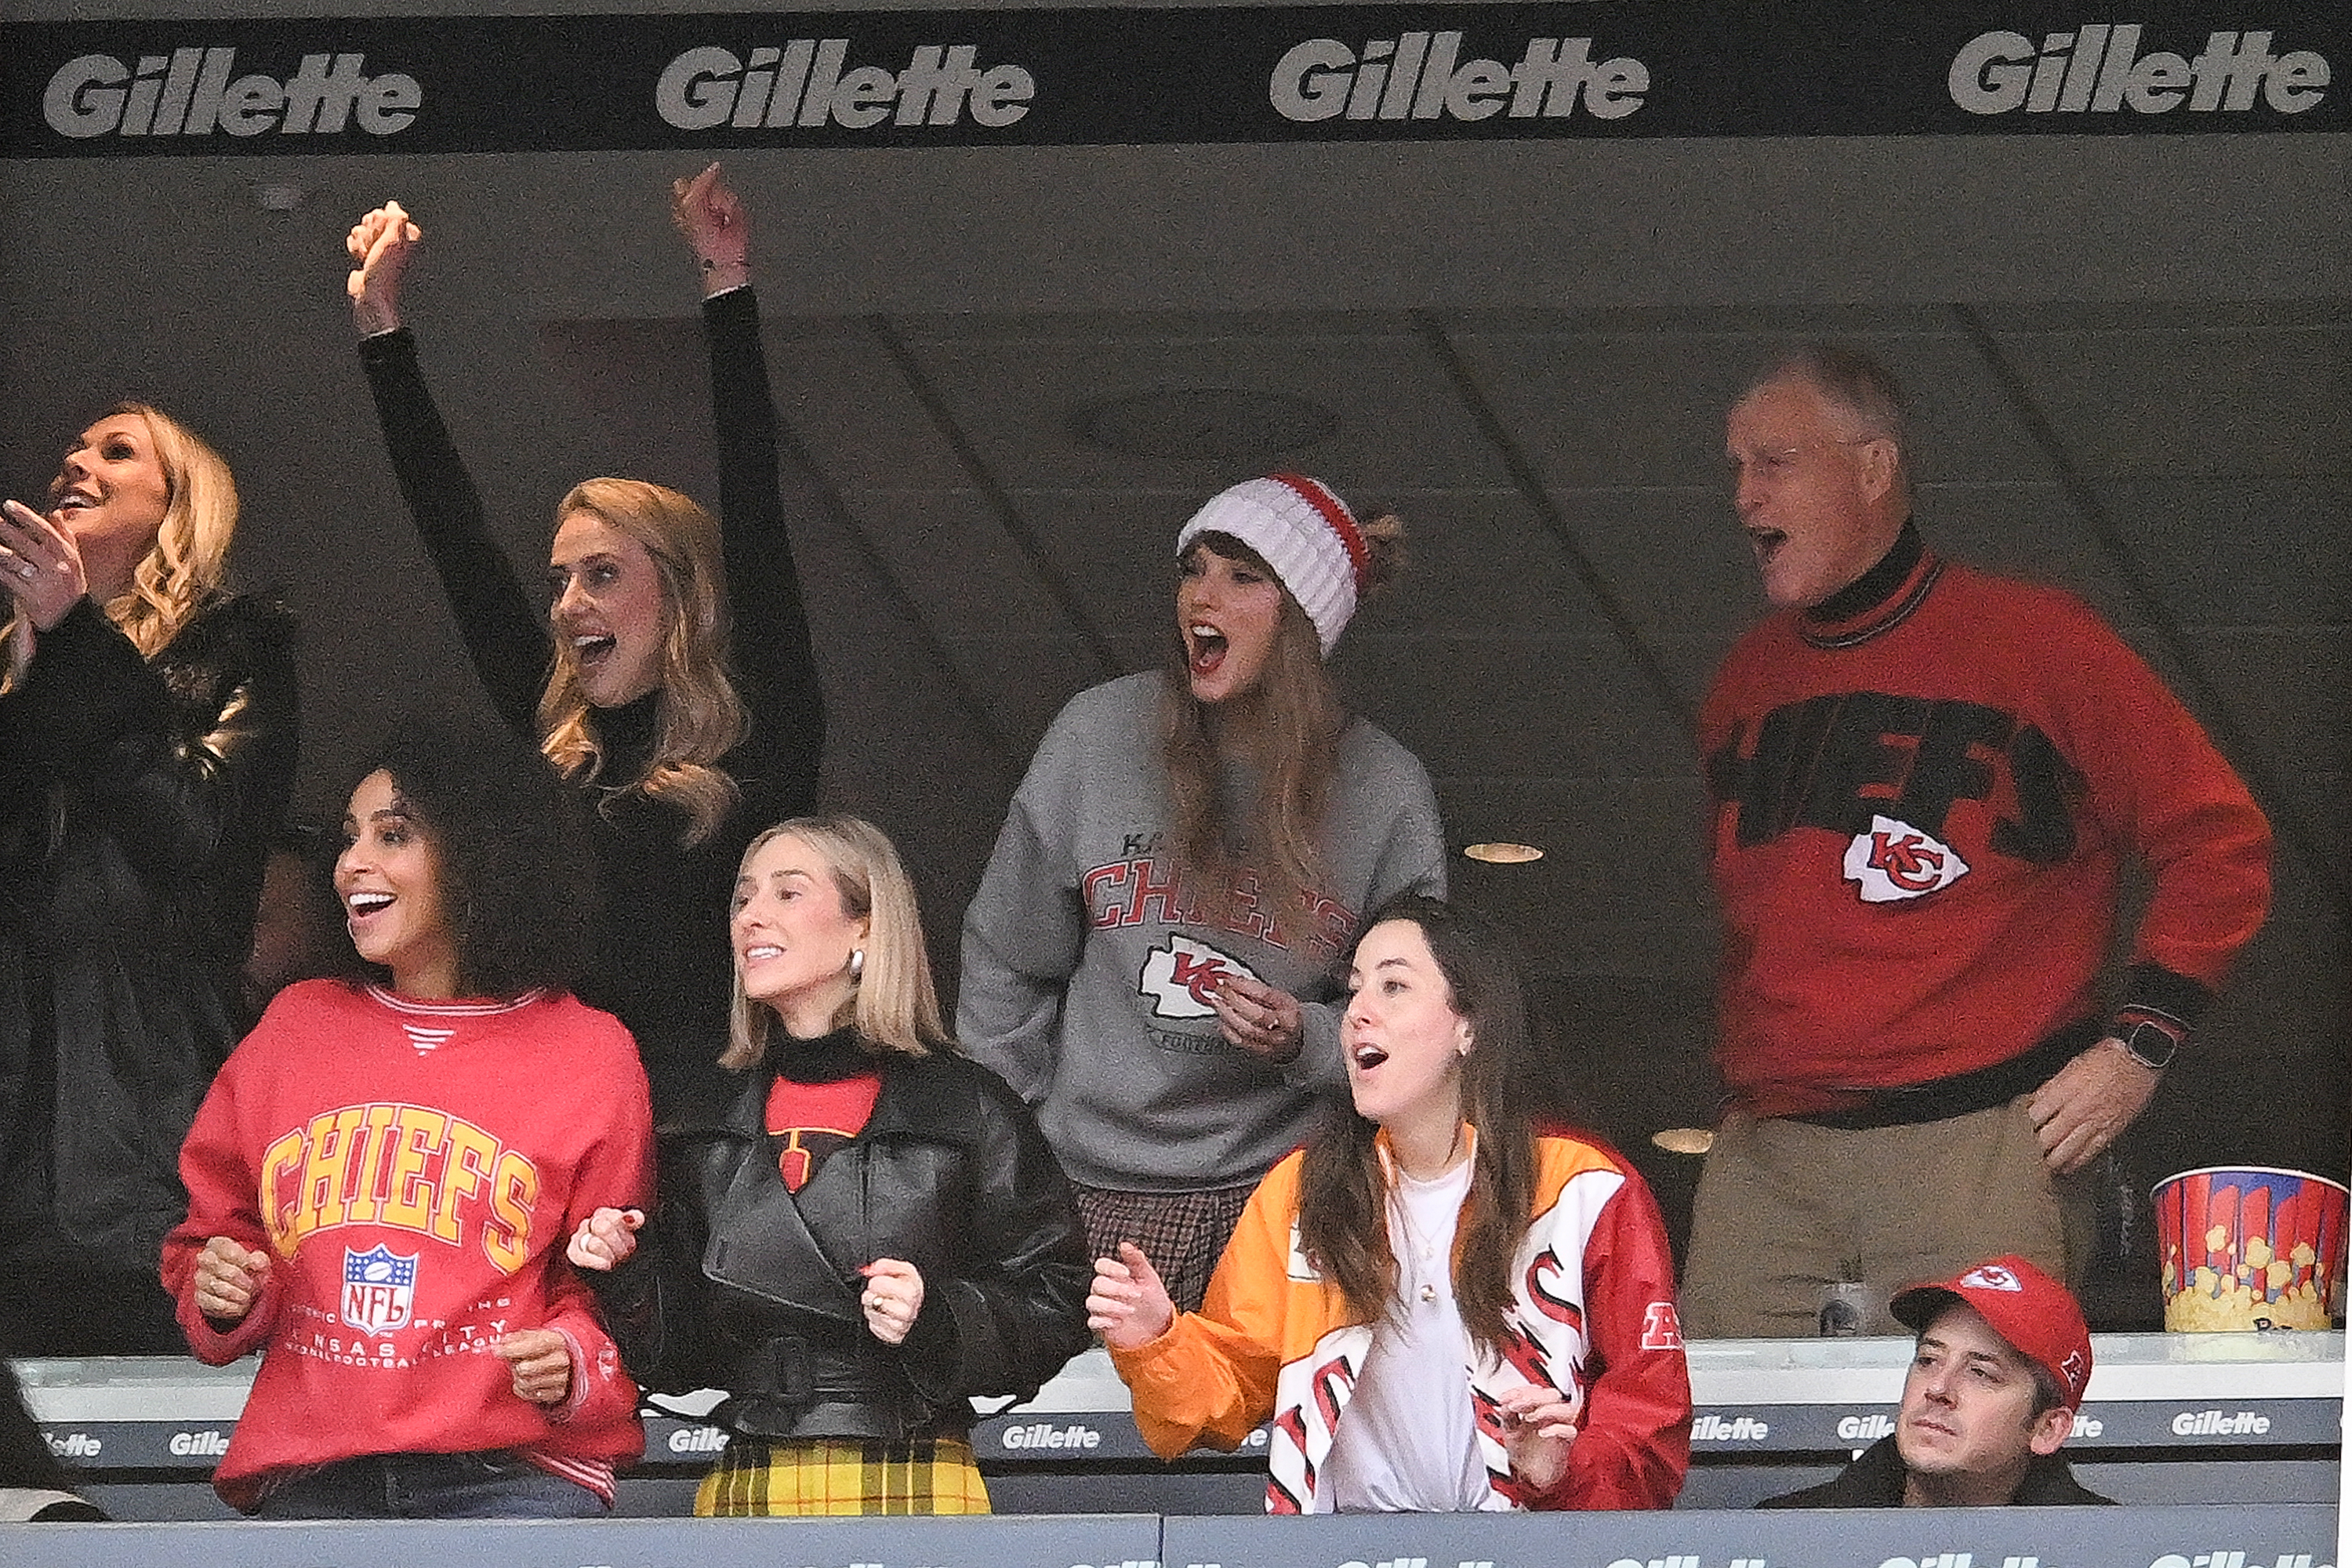 Taylor celebrating with others at a game